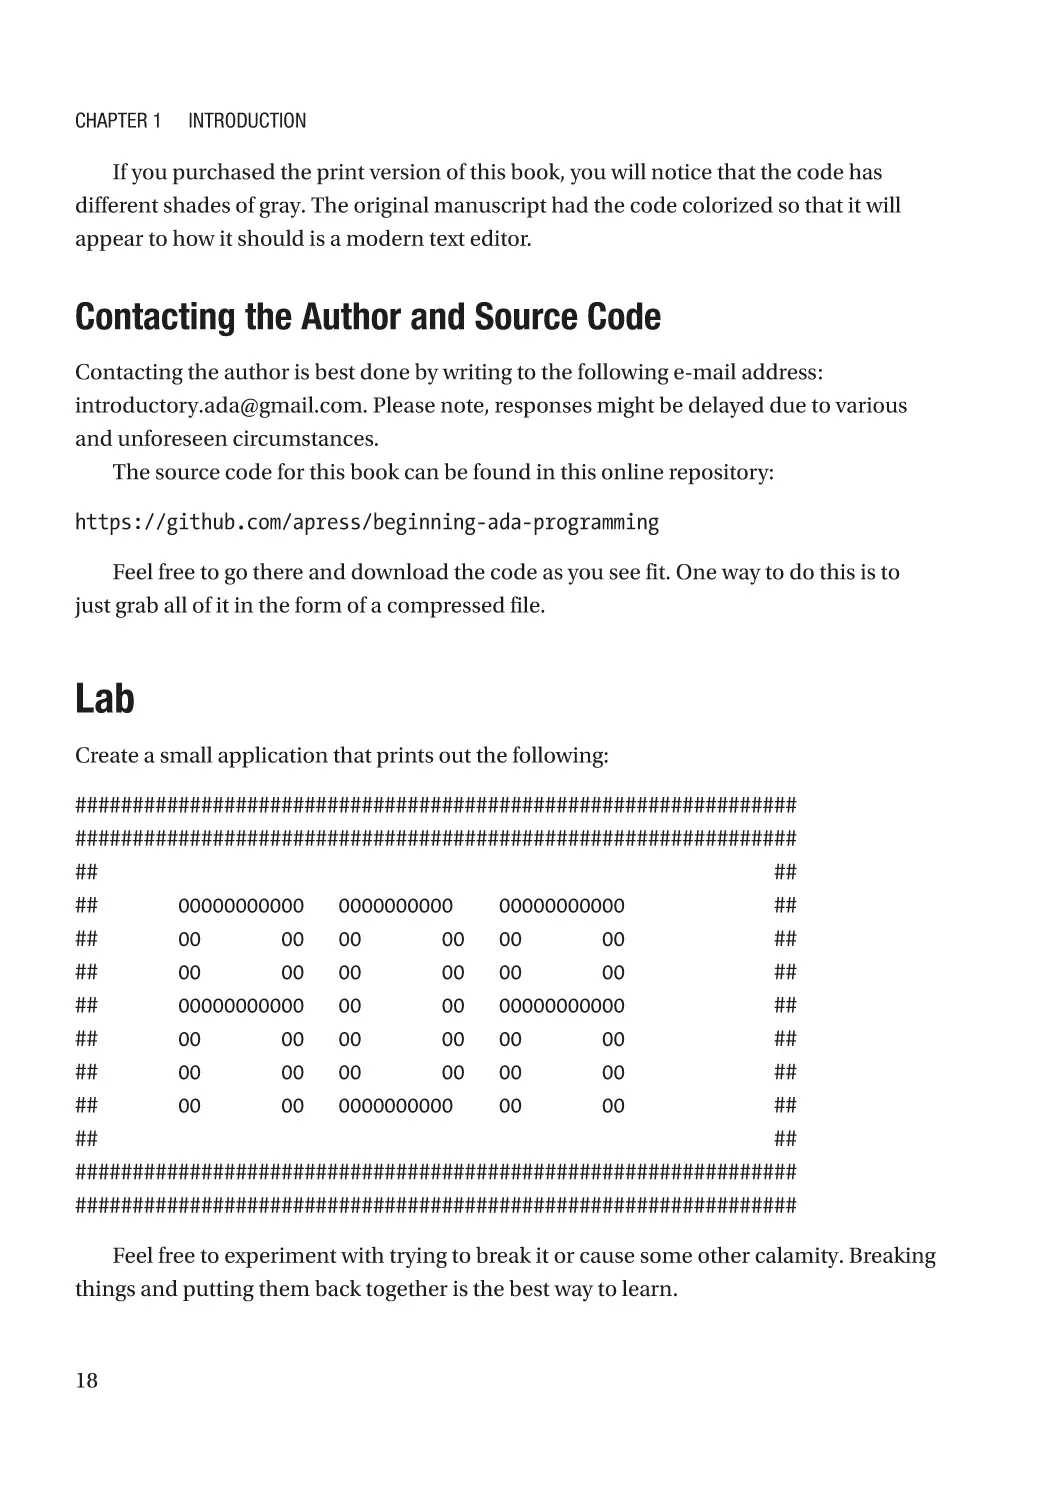 Contacting the Author and Source Code
Lab